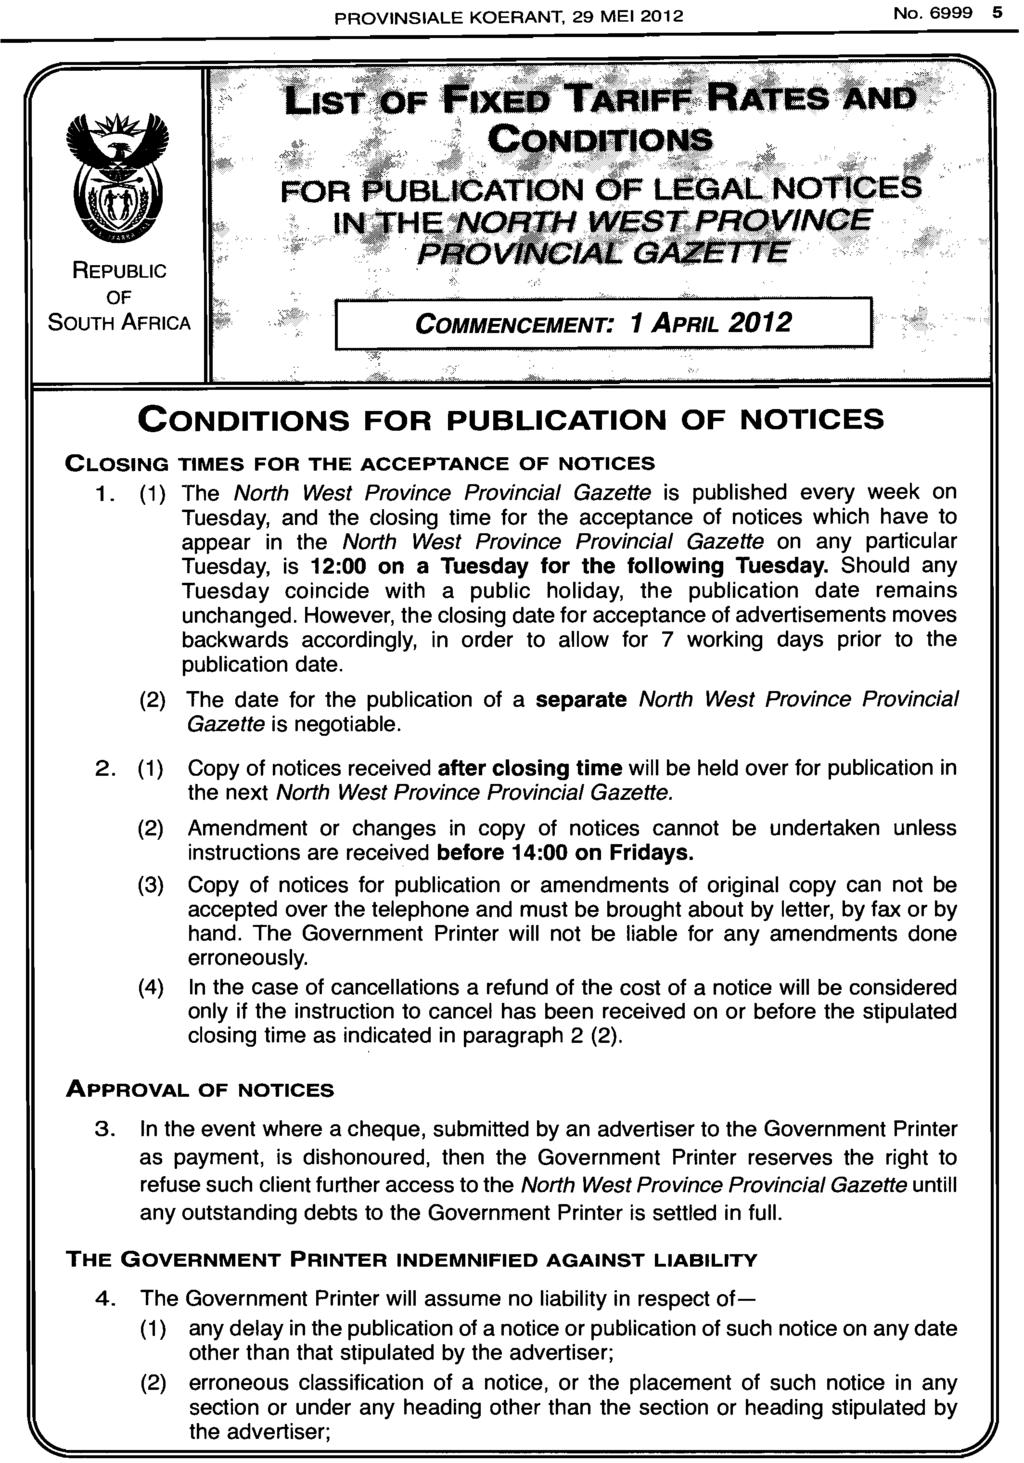 PROVINSIALE KOERANT, 29 MEl 2012 No. 5 "REPUBLIC OF SOUTH AFRICA COMMENCEMENT: 1 APRIL 2012 [------ CONDITIONS FOR PUBLICATION OF N01-ICES CLOSING TIMES FOR THE ACCEPTANCE OF NOTICES 1.